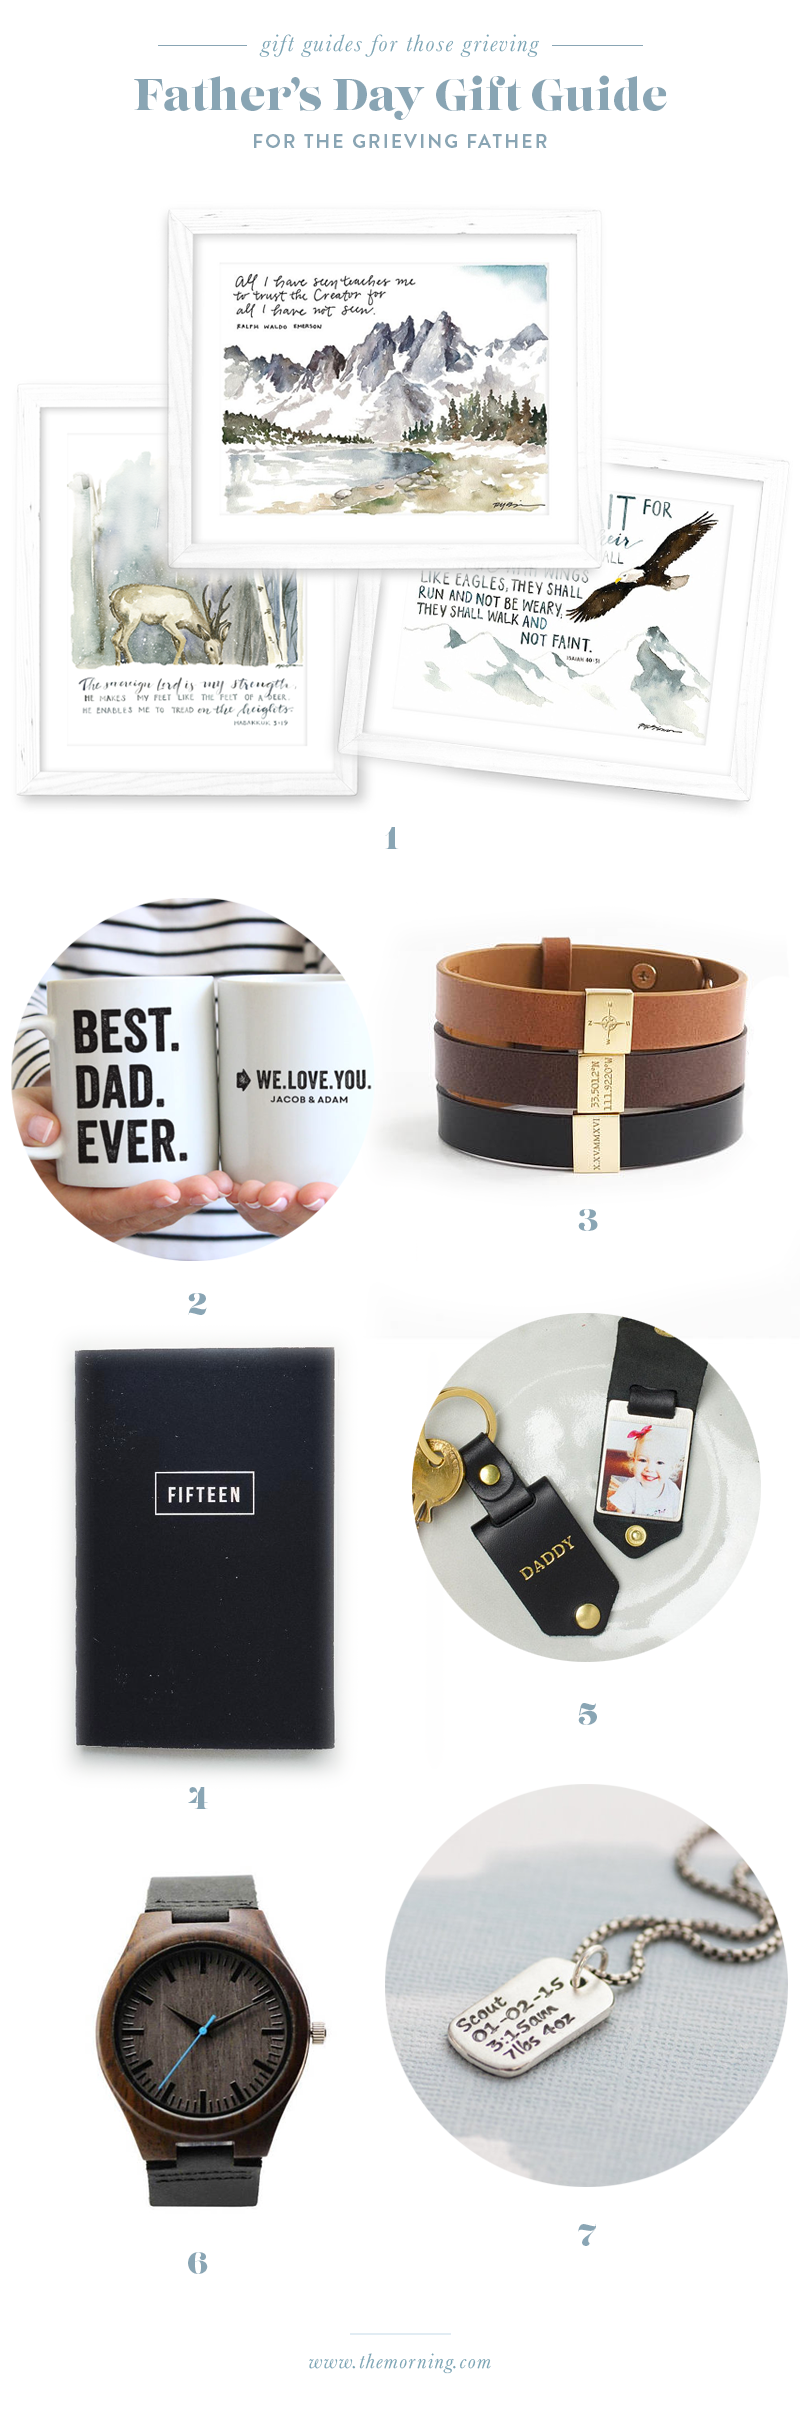 Gift Guide: Father's Day for Grieving